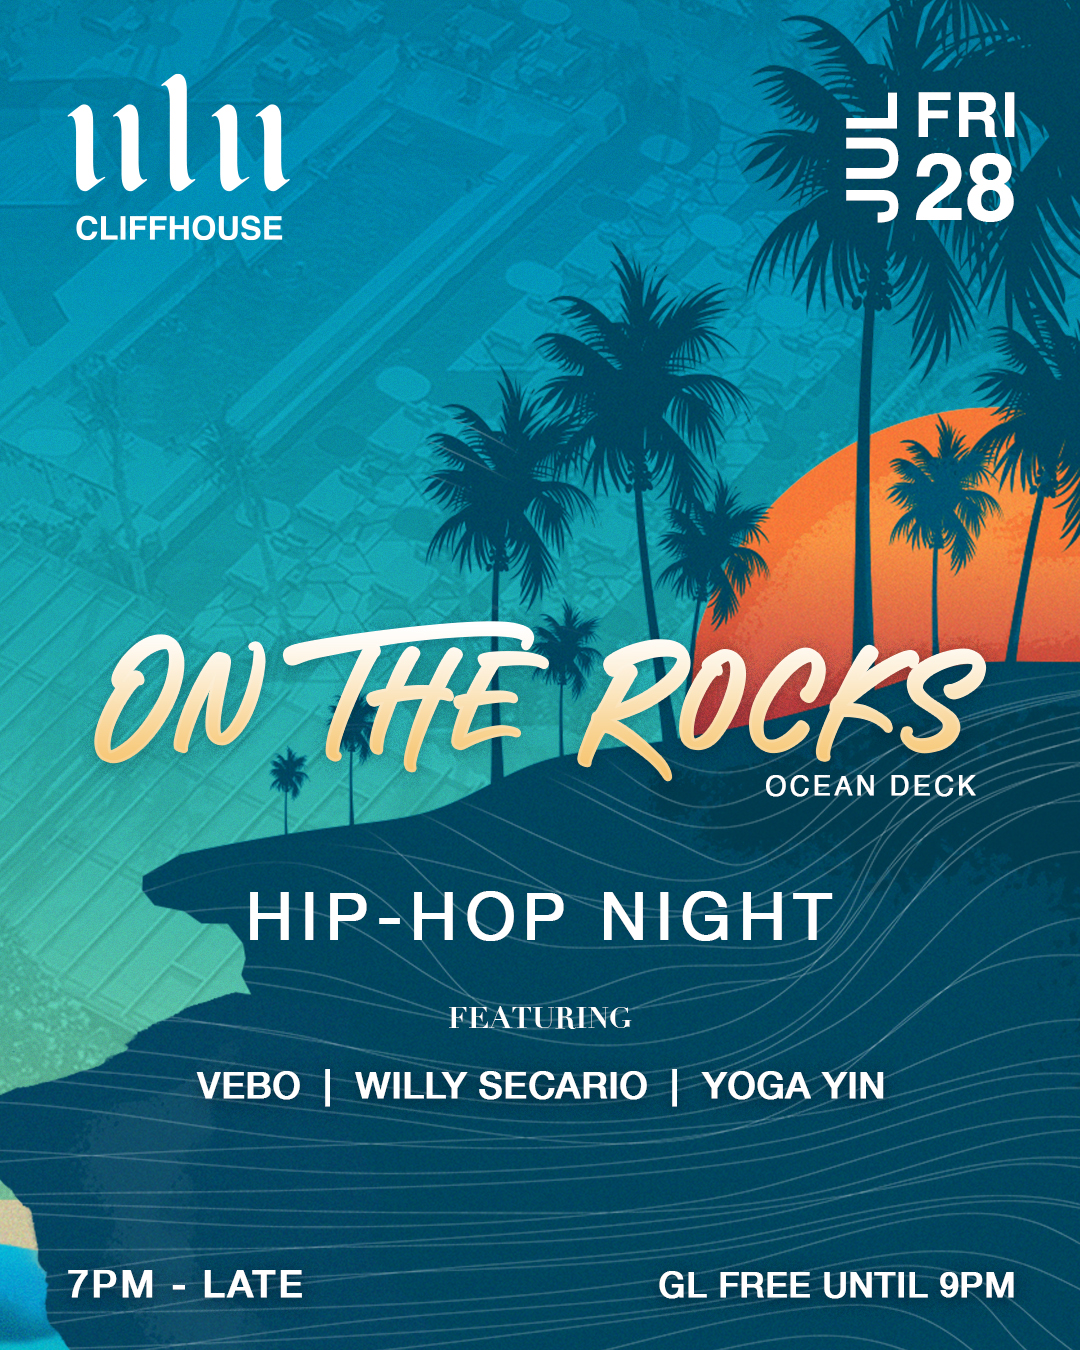 ULU CLIFFHOUSE PRESENTS ON THE ROCKS – FRIDAY JULY 28TH thumbnail image